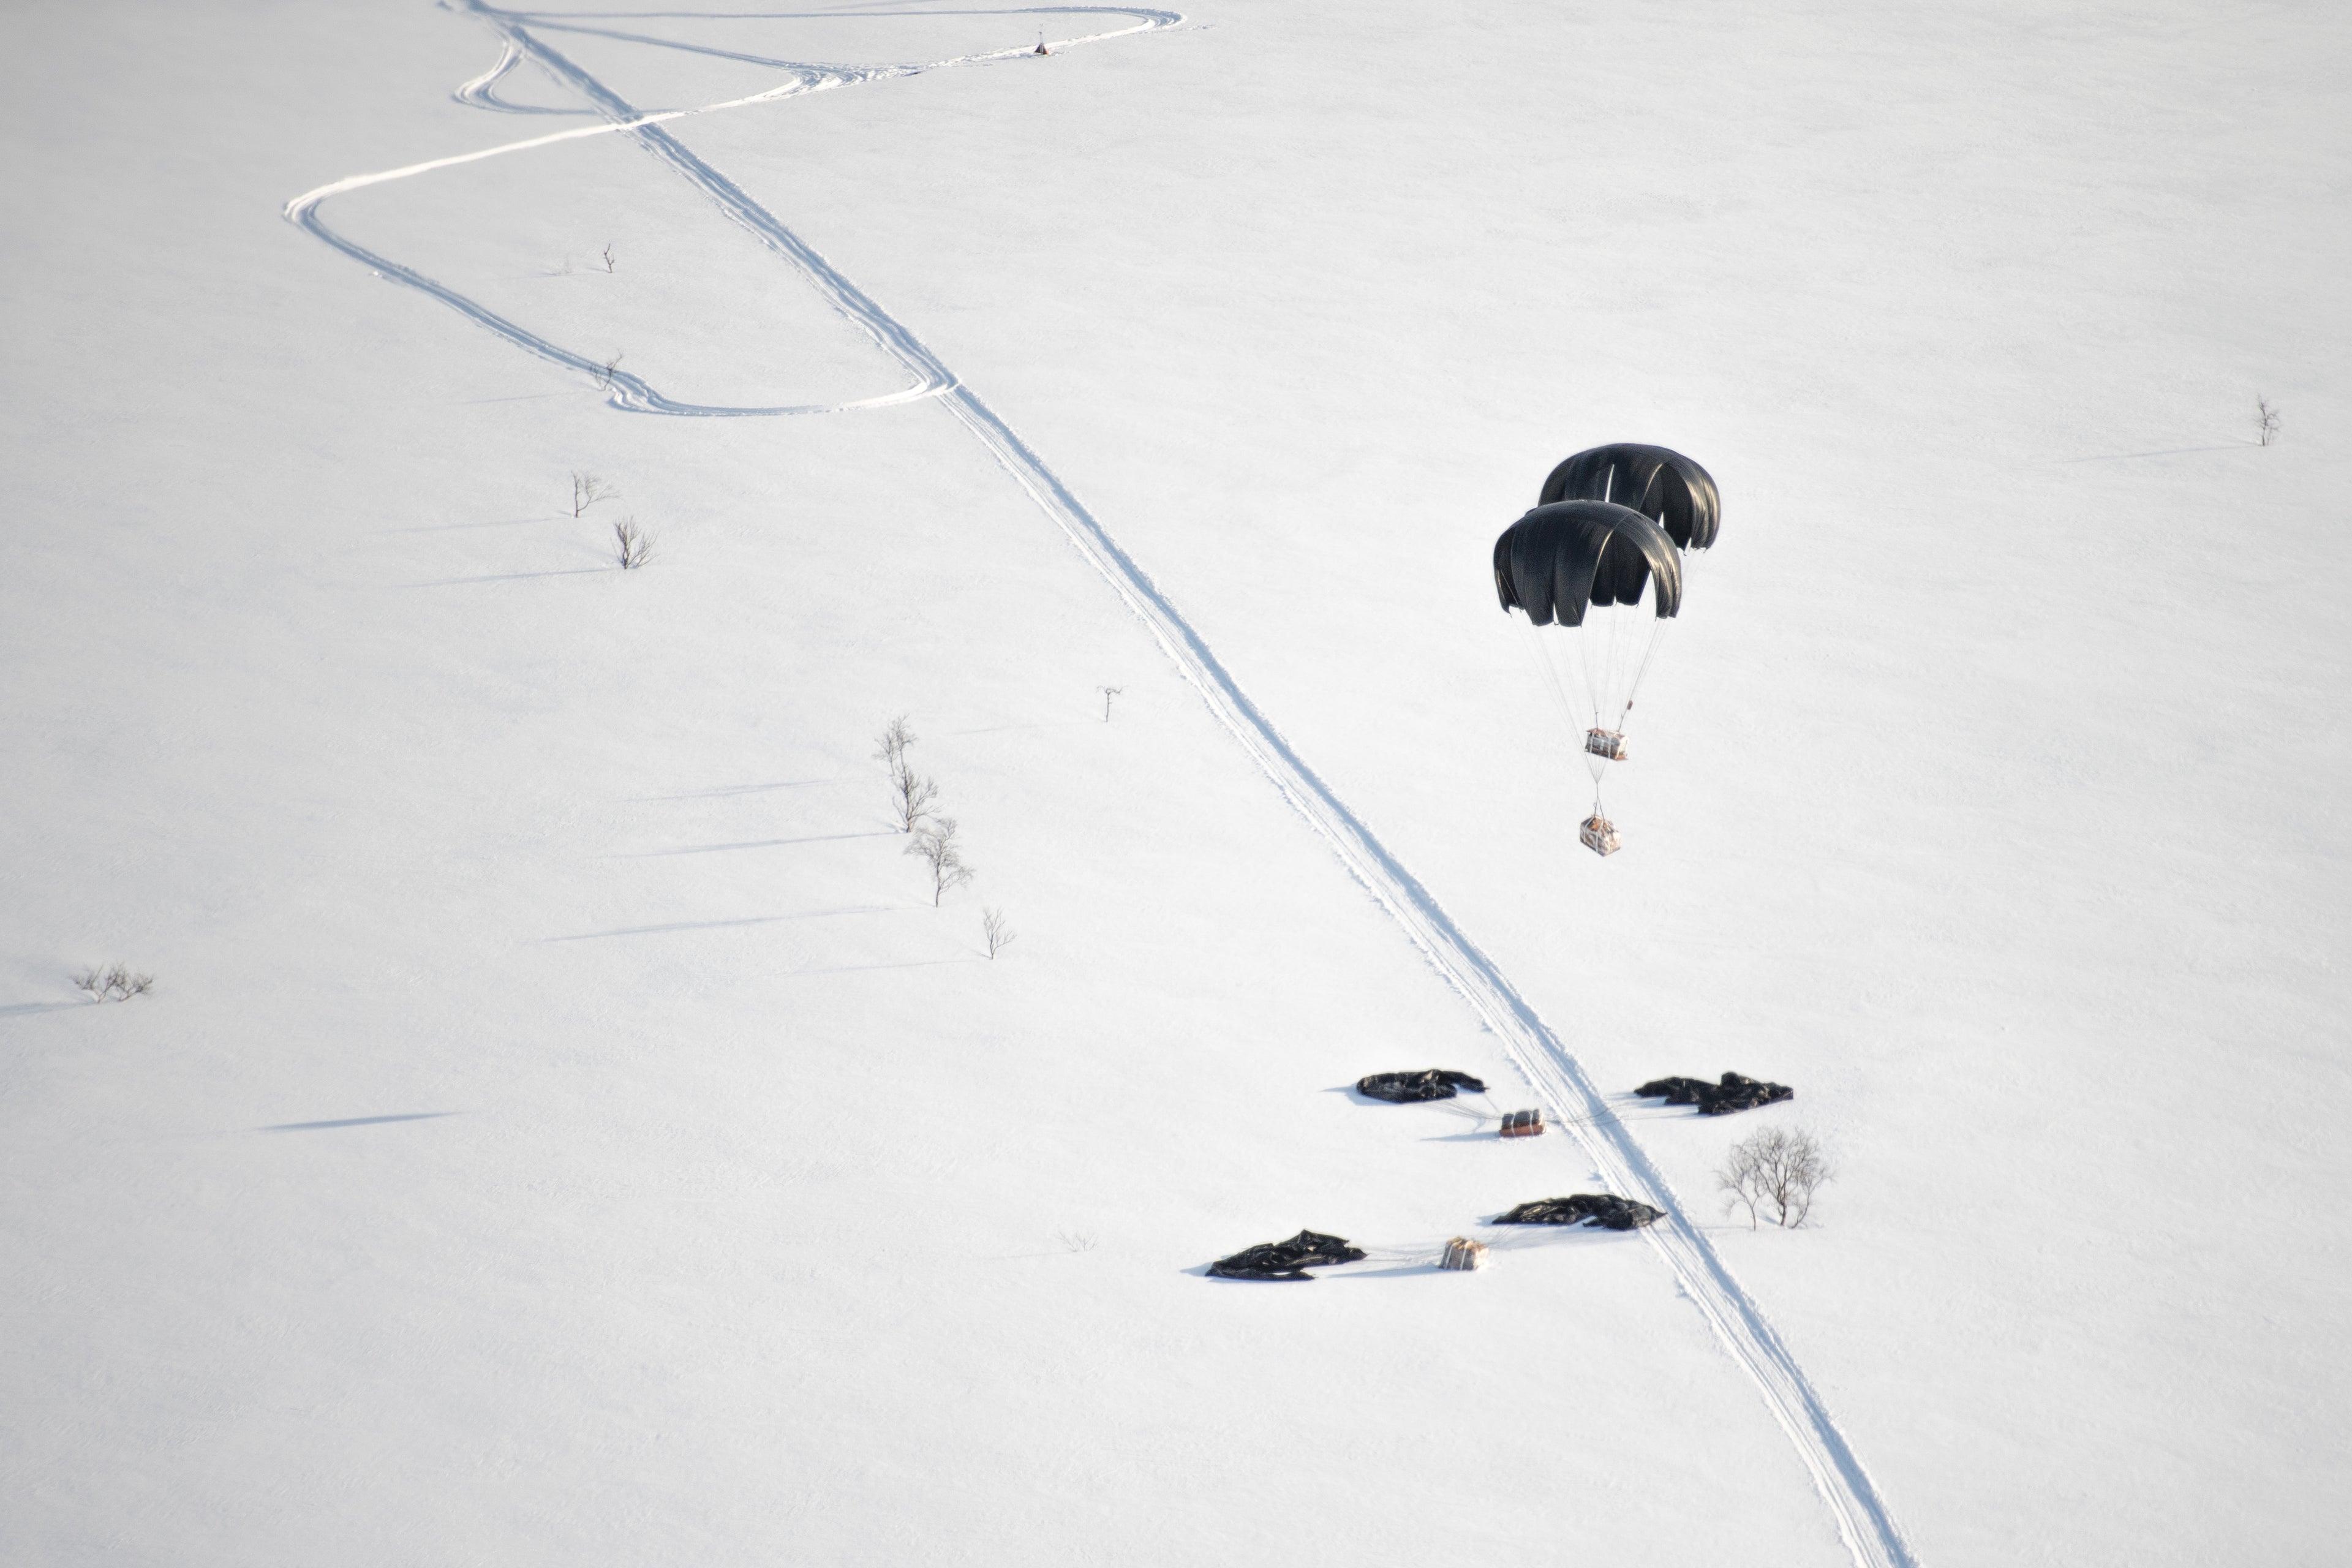 LCLA - Low Cost Low Altitude Cargo Parachutes airdropped supplies in Antarctica 